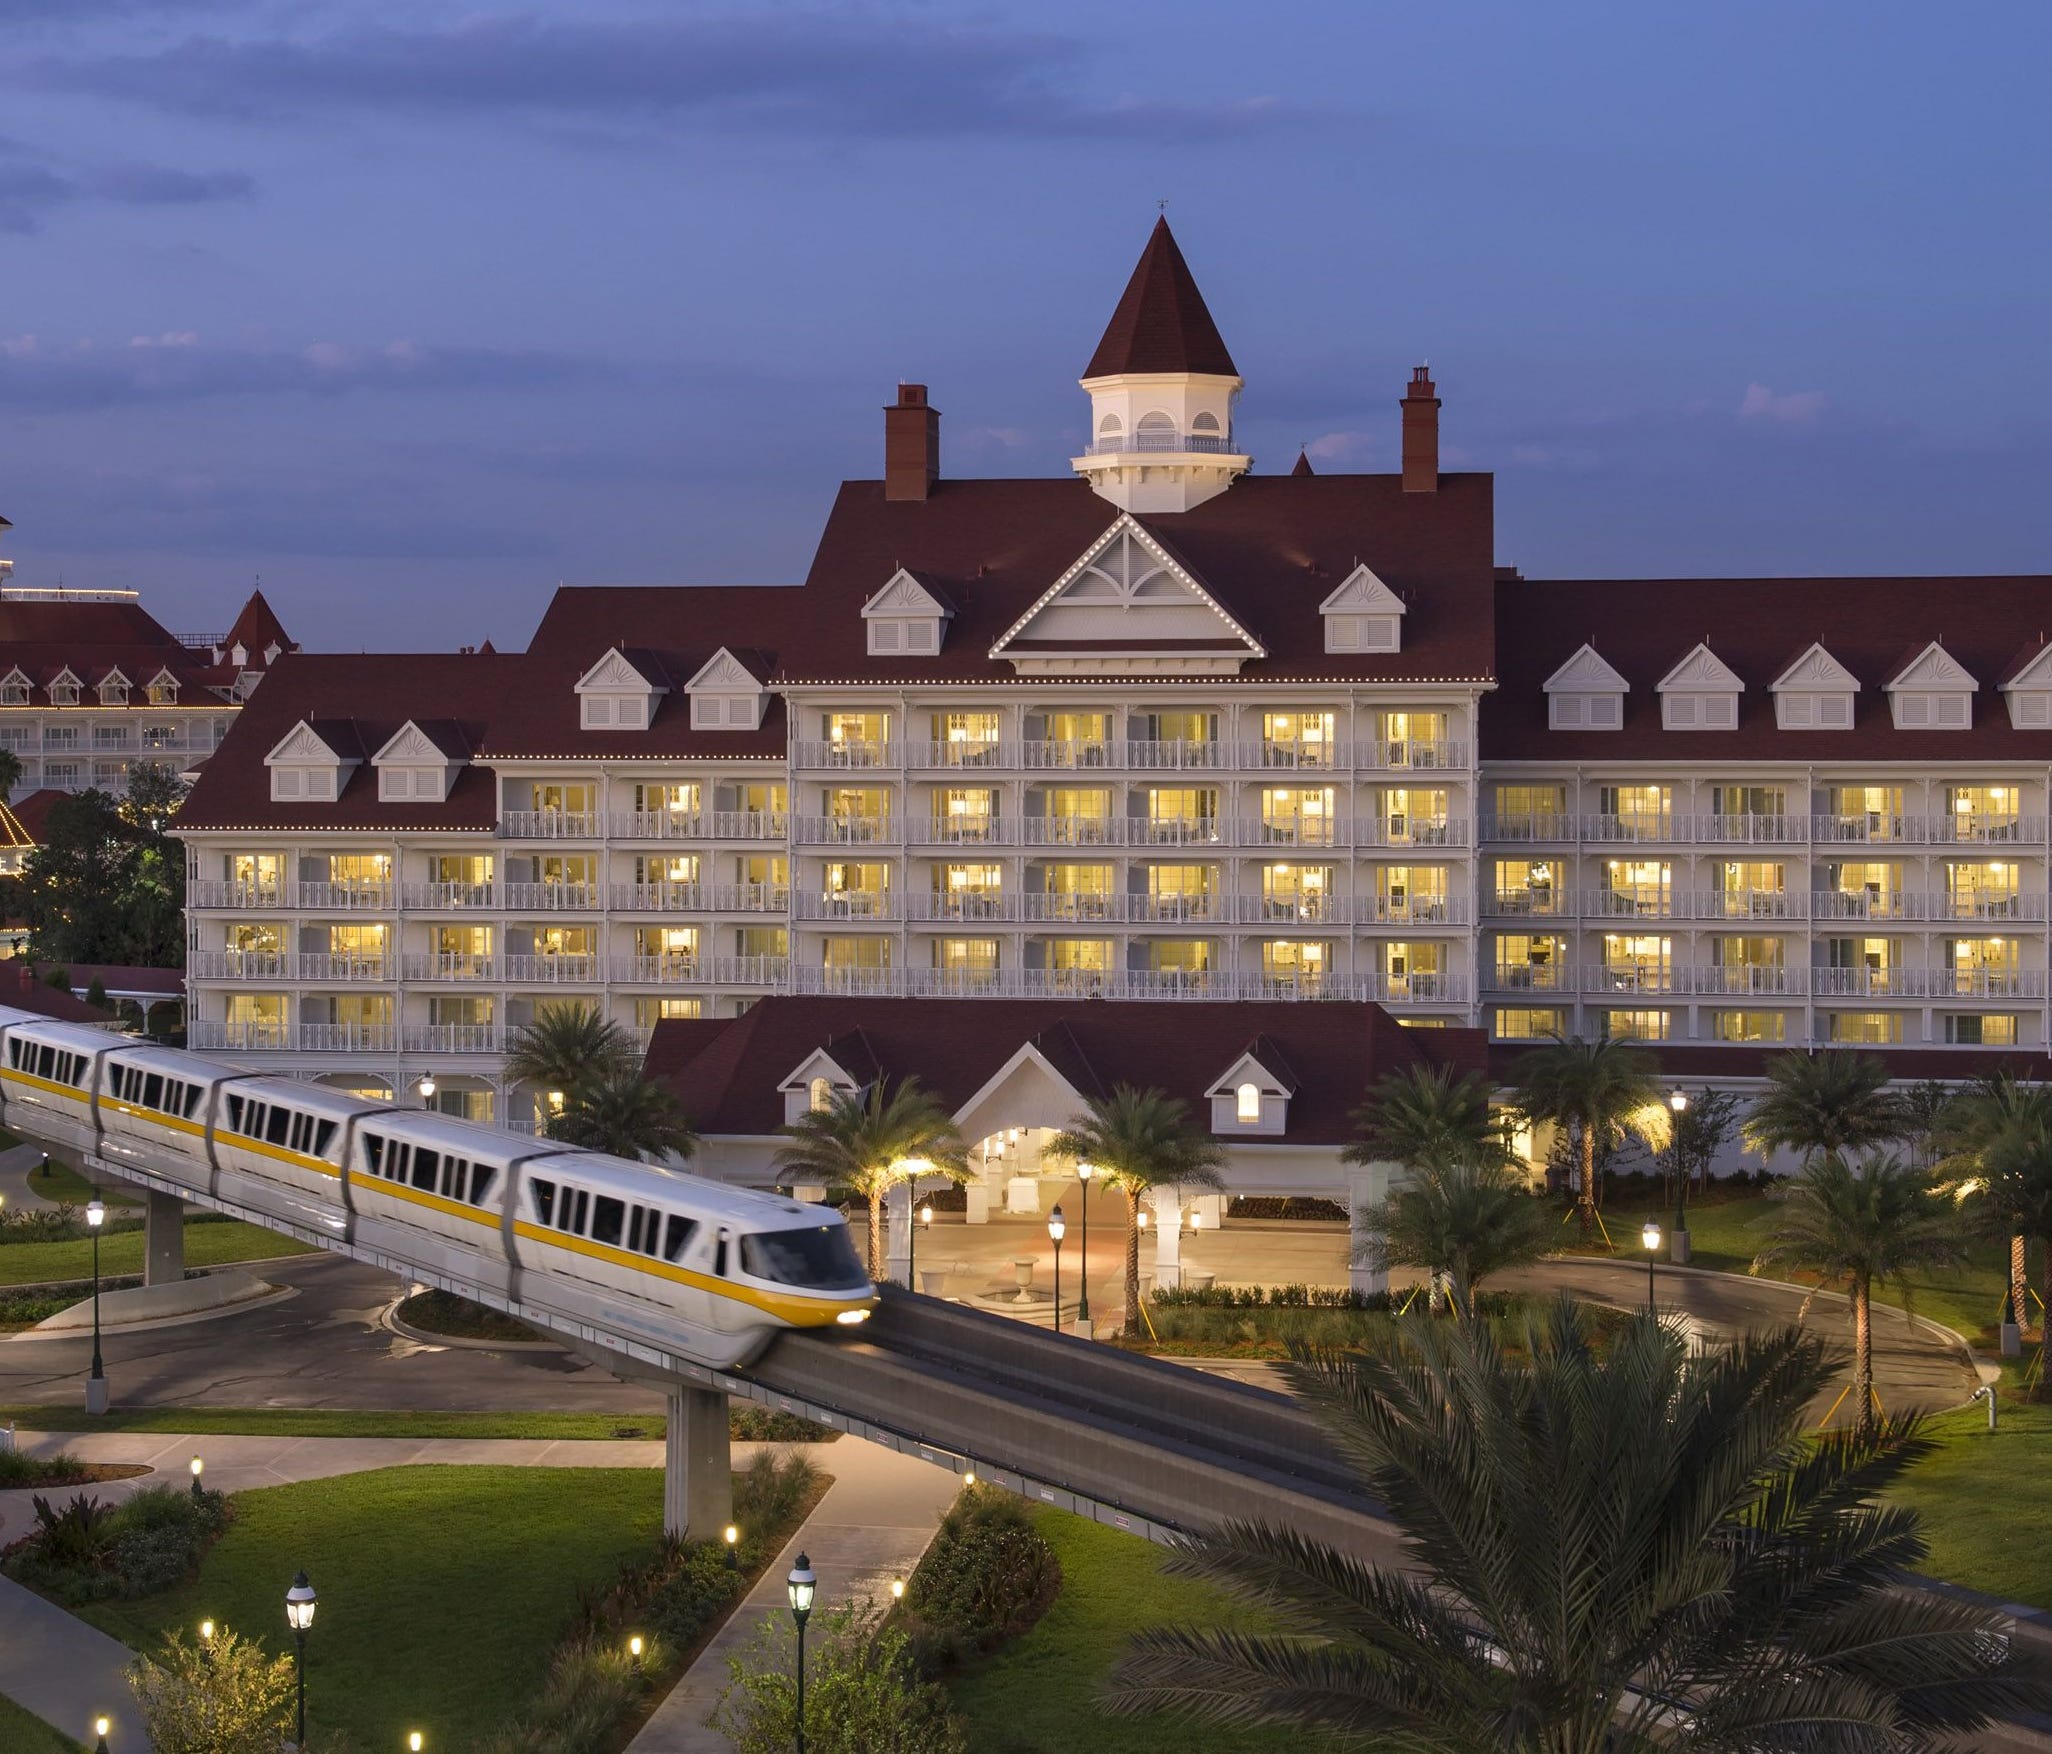 Disney Vacation Club welcomes its 12th resort to its portfolio of vacation destinations with the opening of The Villas at Disney's Grand Floridian Resort & Spa, located within walking distance of a monorail ride to Magic Kingdom Park. The resort Ð re